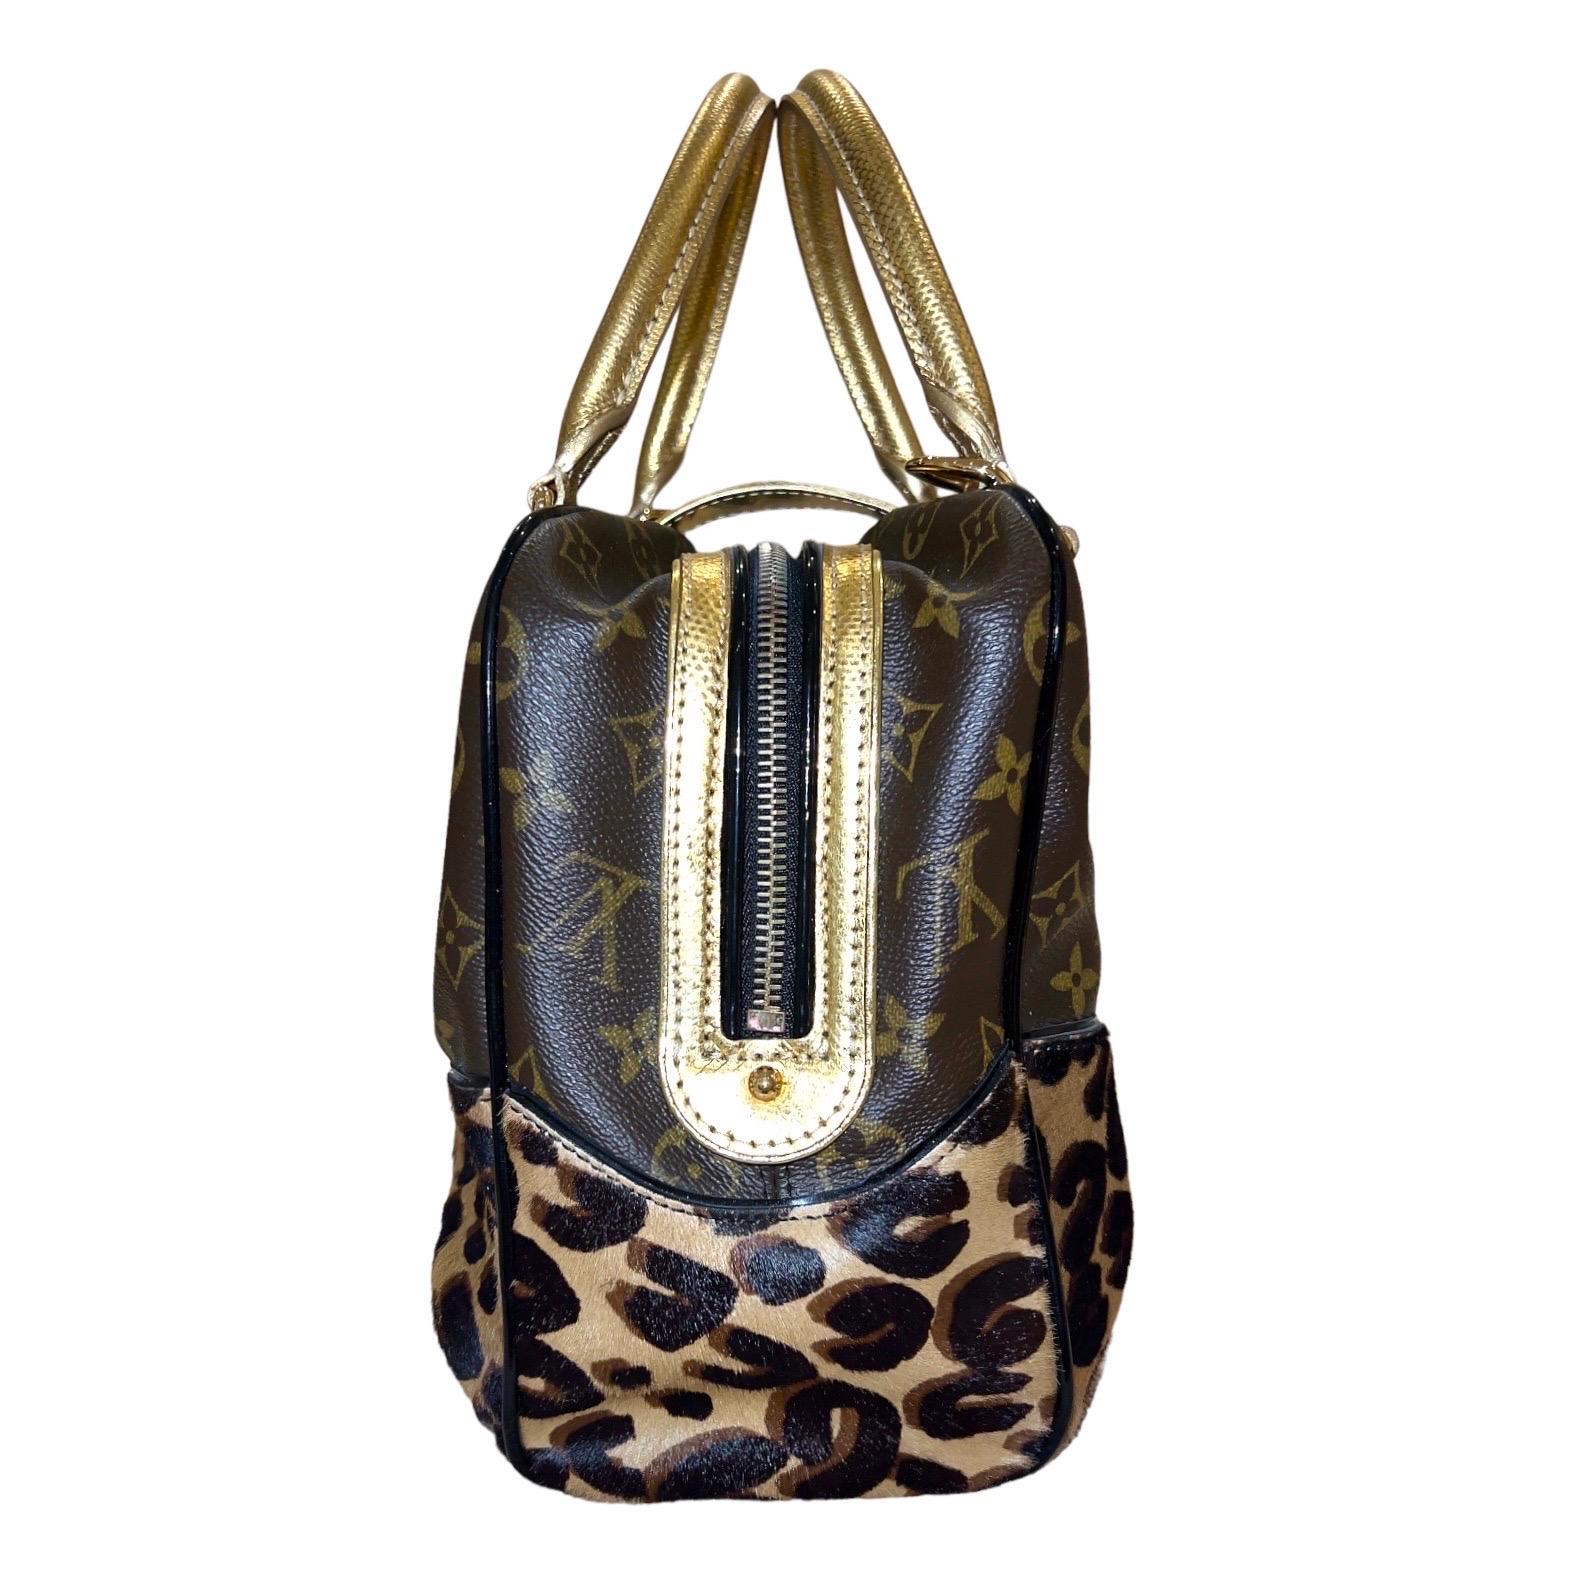 Limited Edition Louis Vuitton Fur Bag - For Sale on 1stDibs